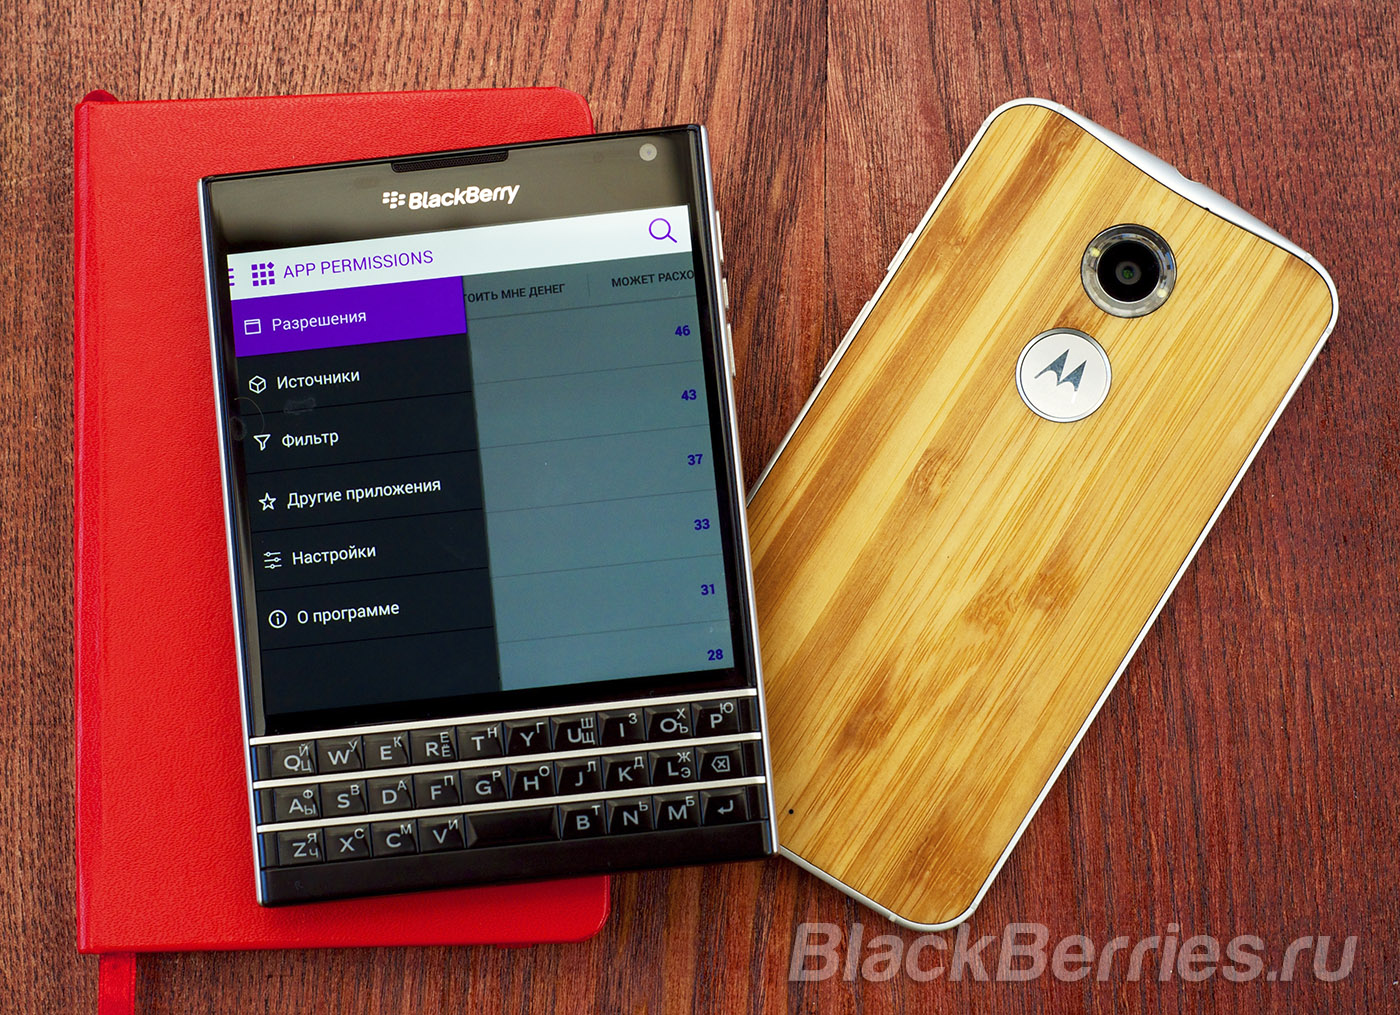 BlackBerry-Android-2